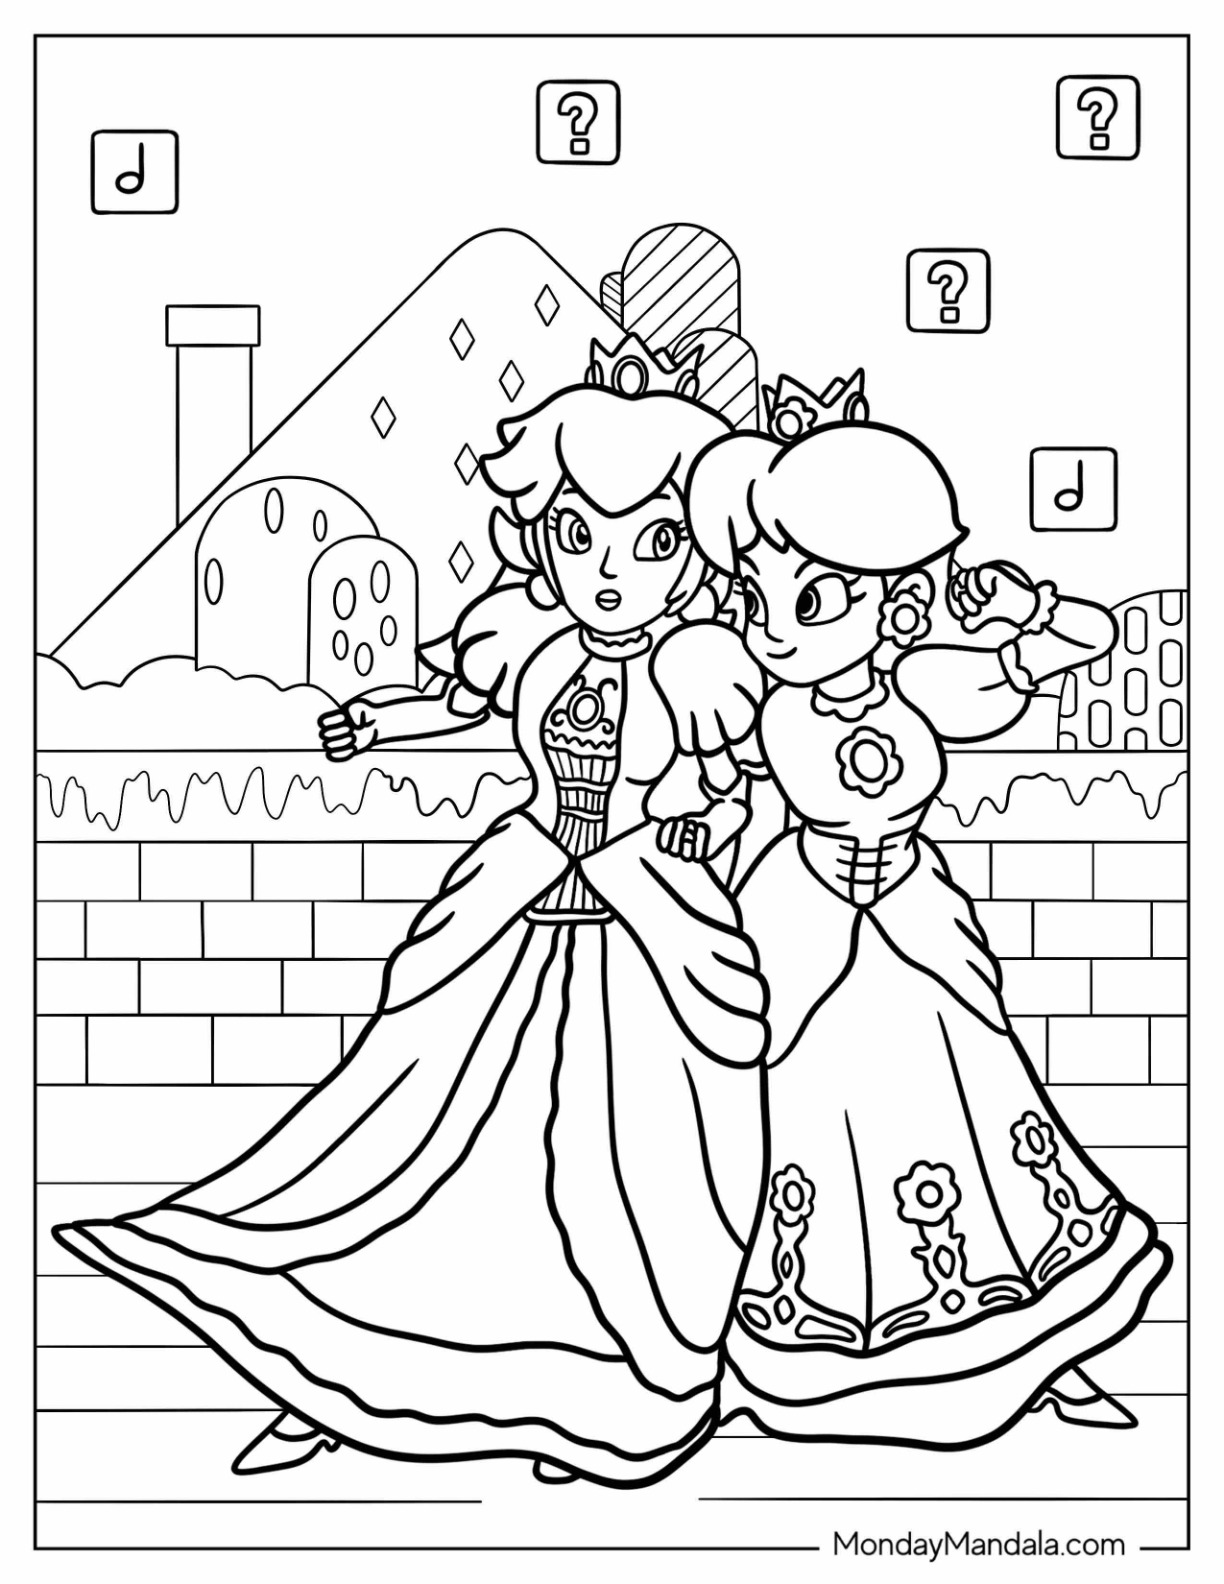 Princess daisy coloring pages free pdf printables